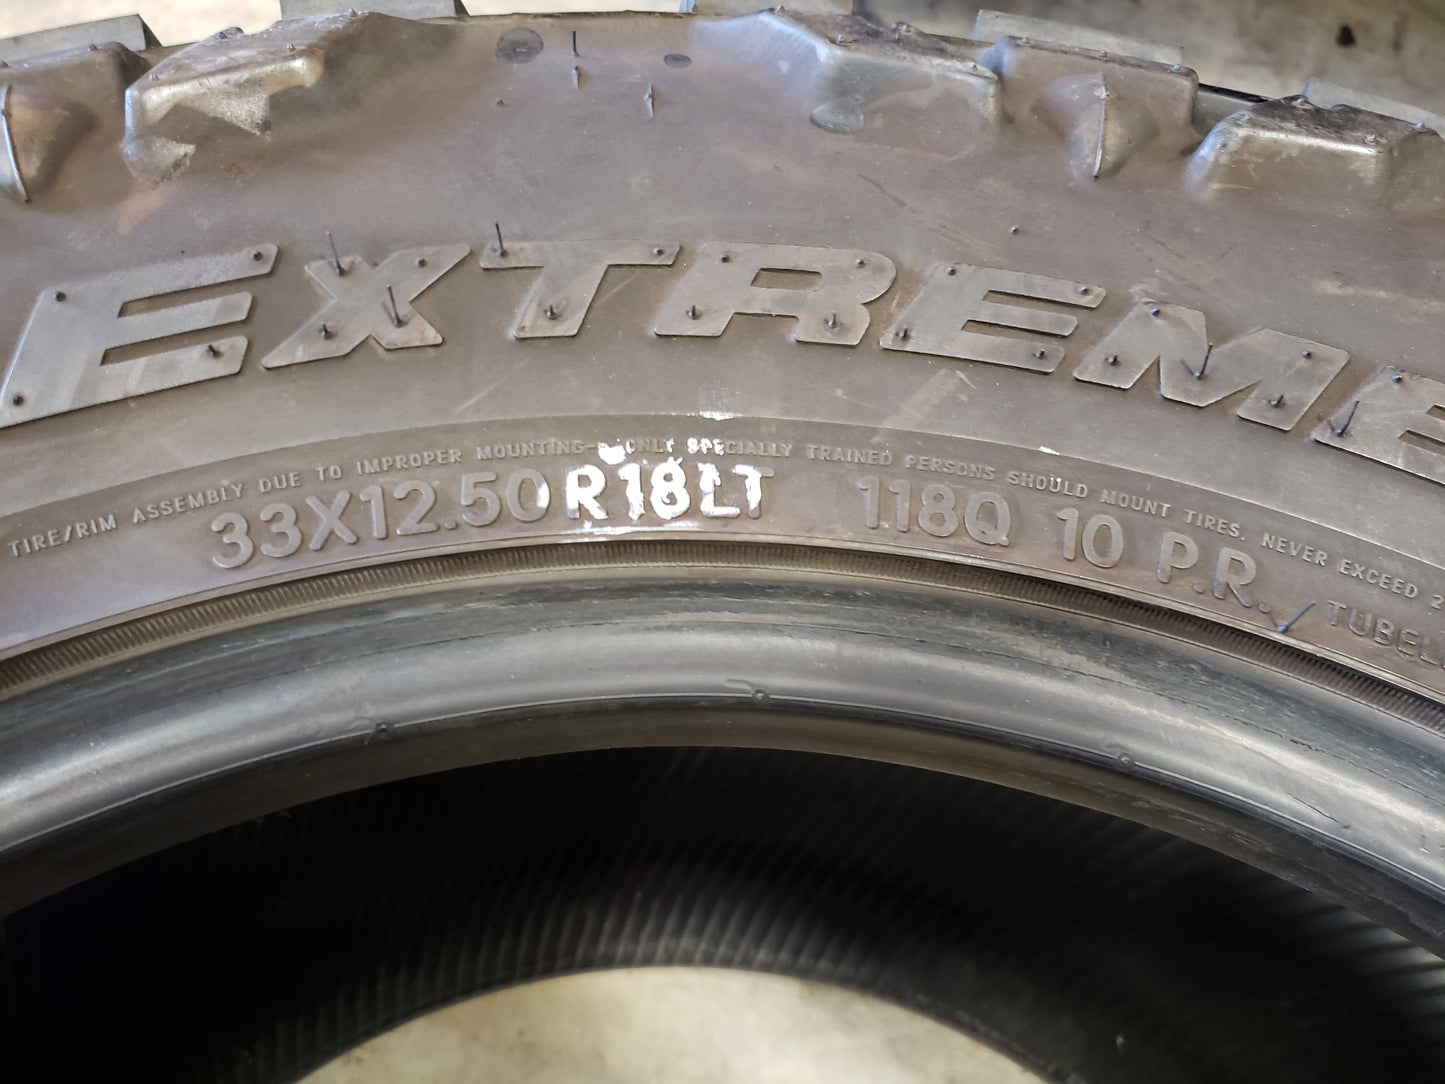 SET OF 2 33X12.50R18 Nitto Mud Grapper Extreme Terrain 118 Q E - Used Tires